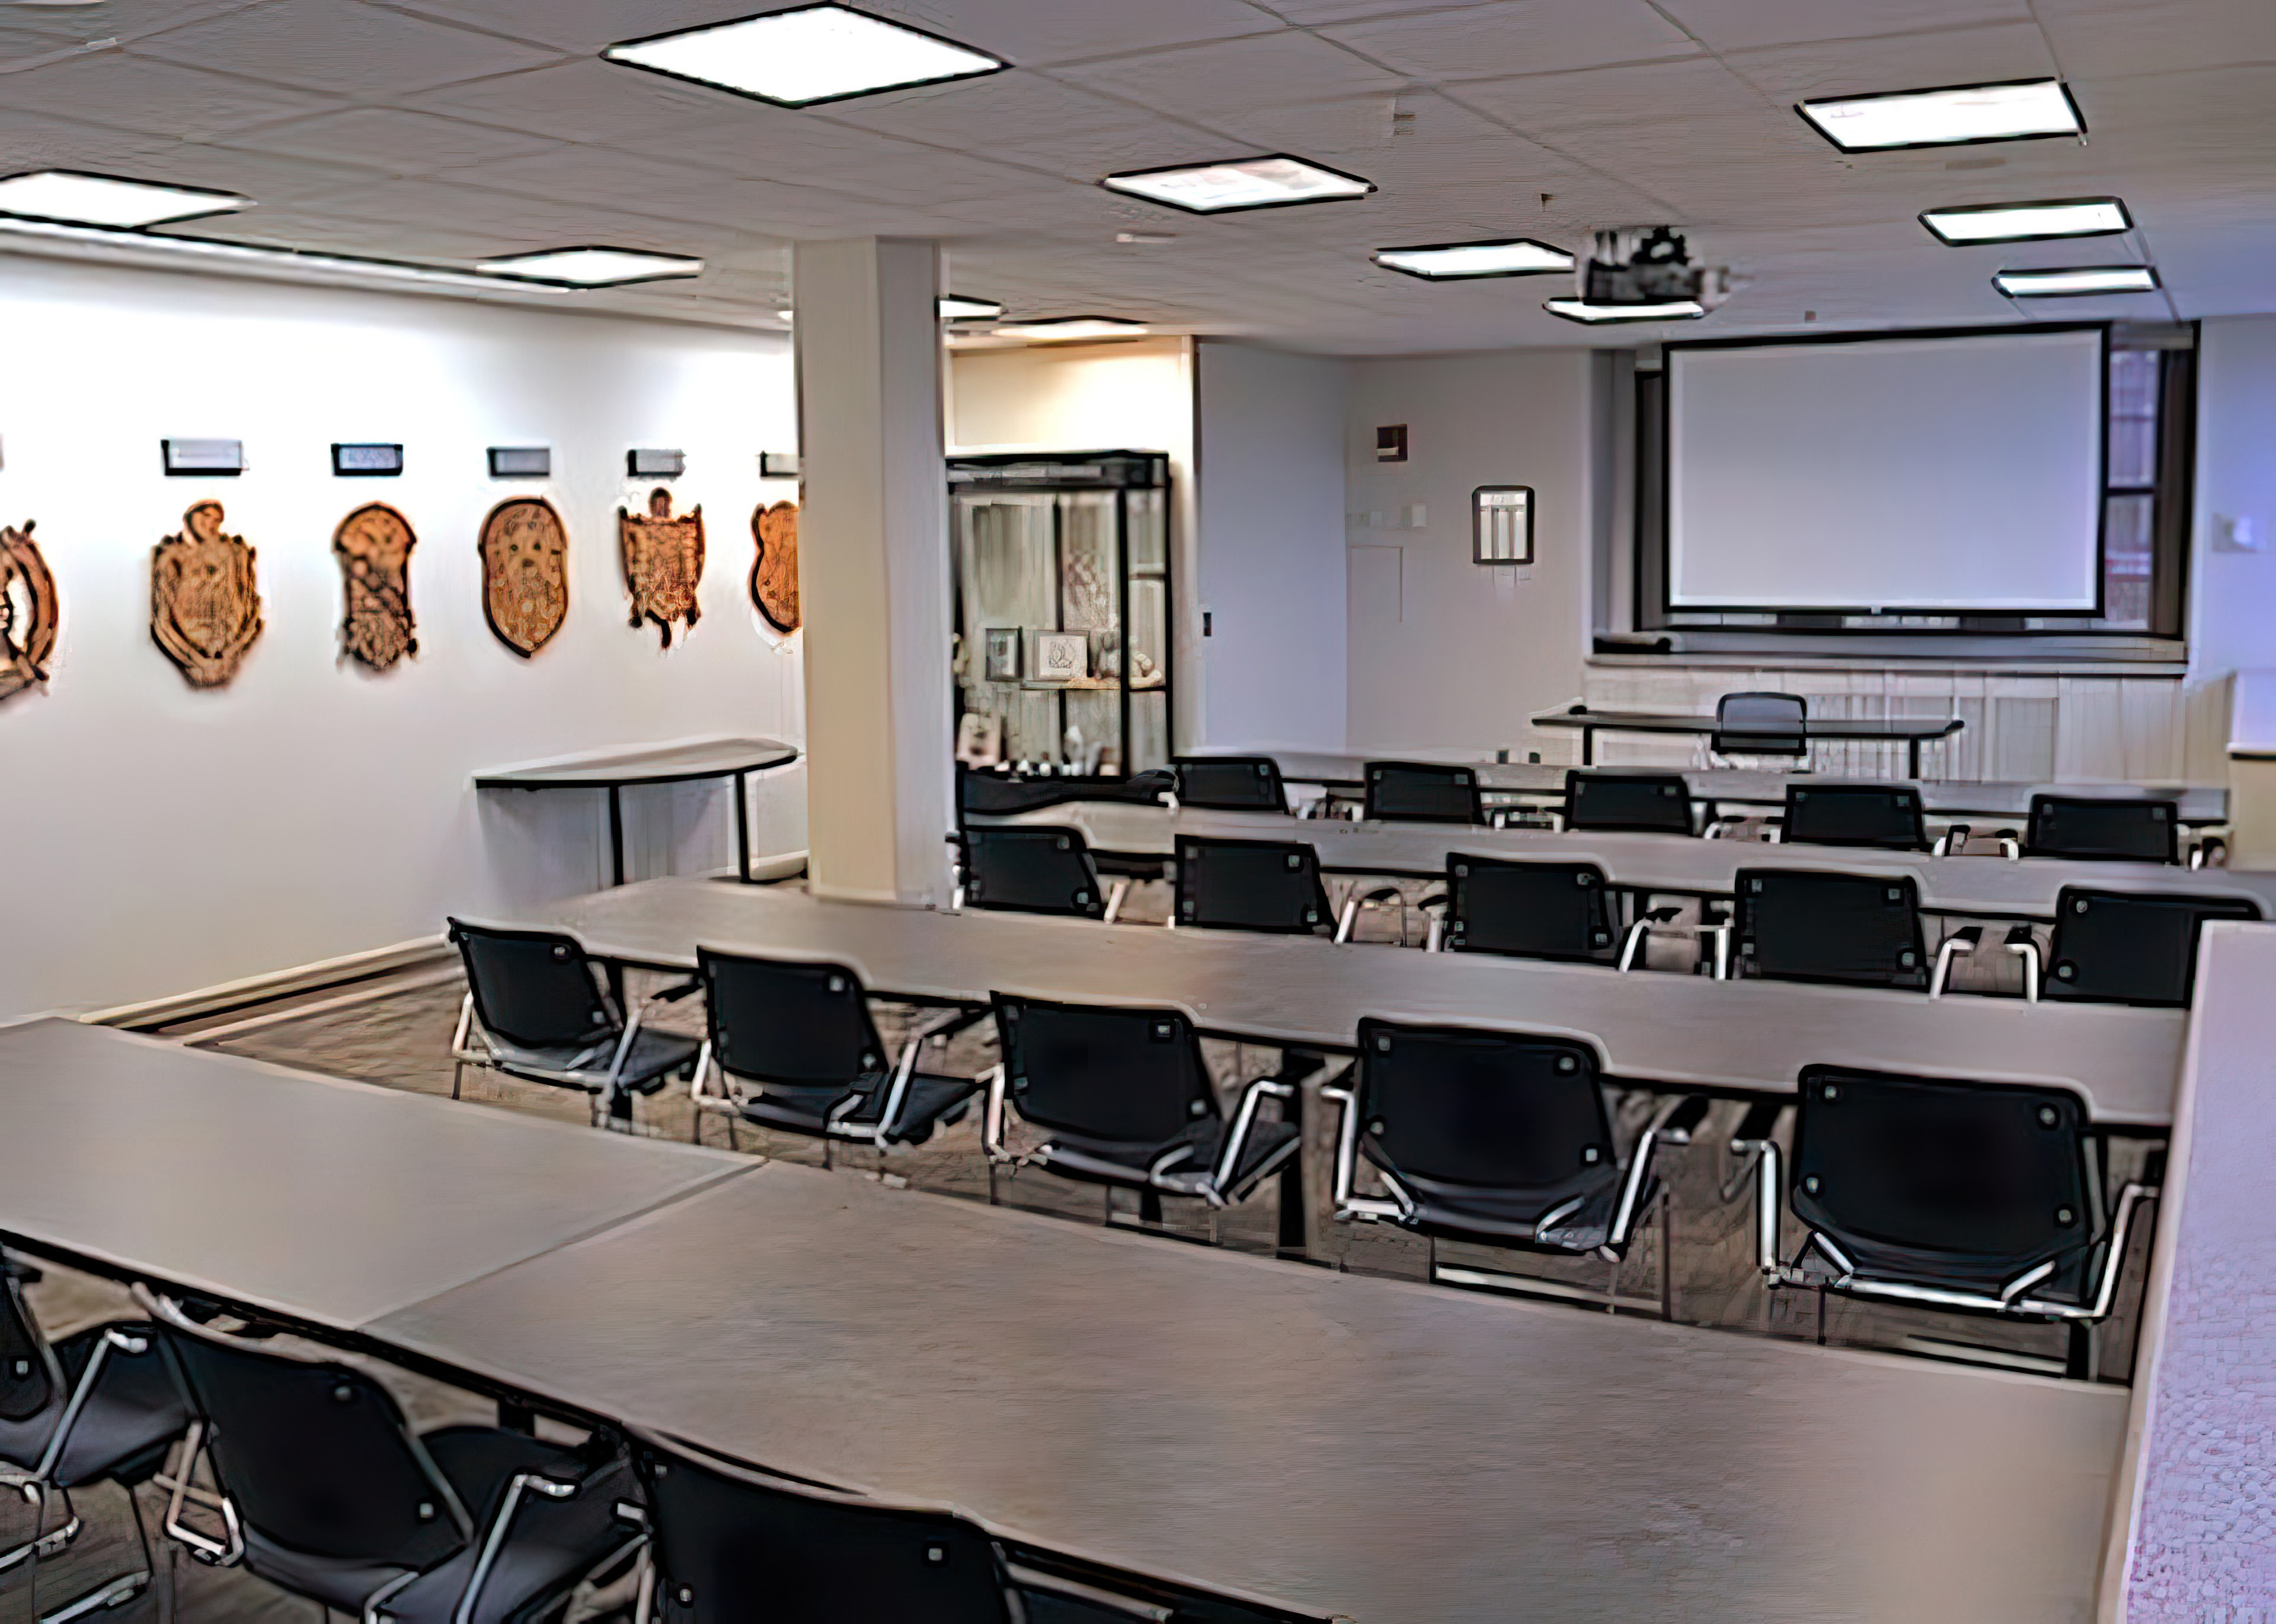 Tables and chairs arranged in rows face a dropdown view-screen. The crests of historically black sororities and fraternities adorn the walls.